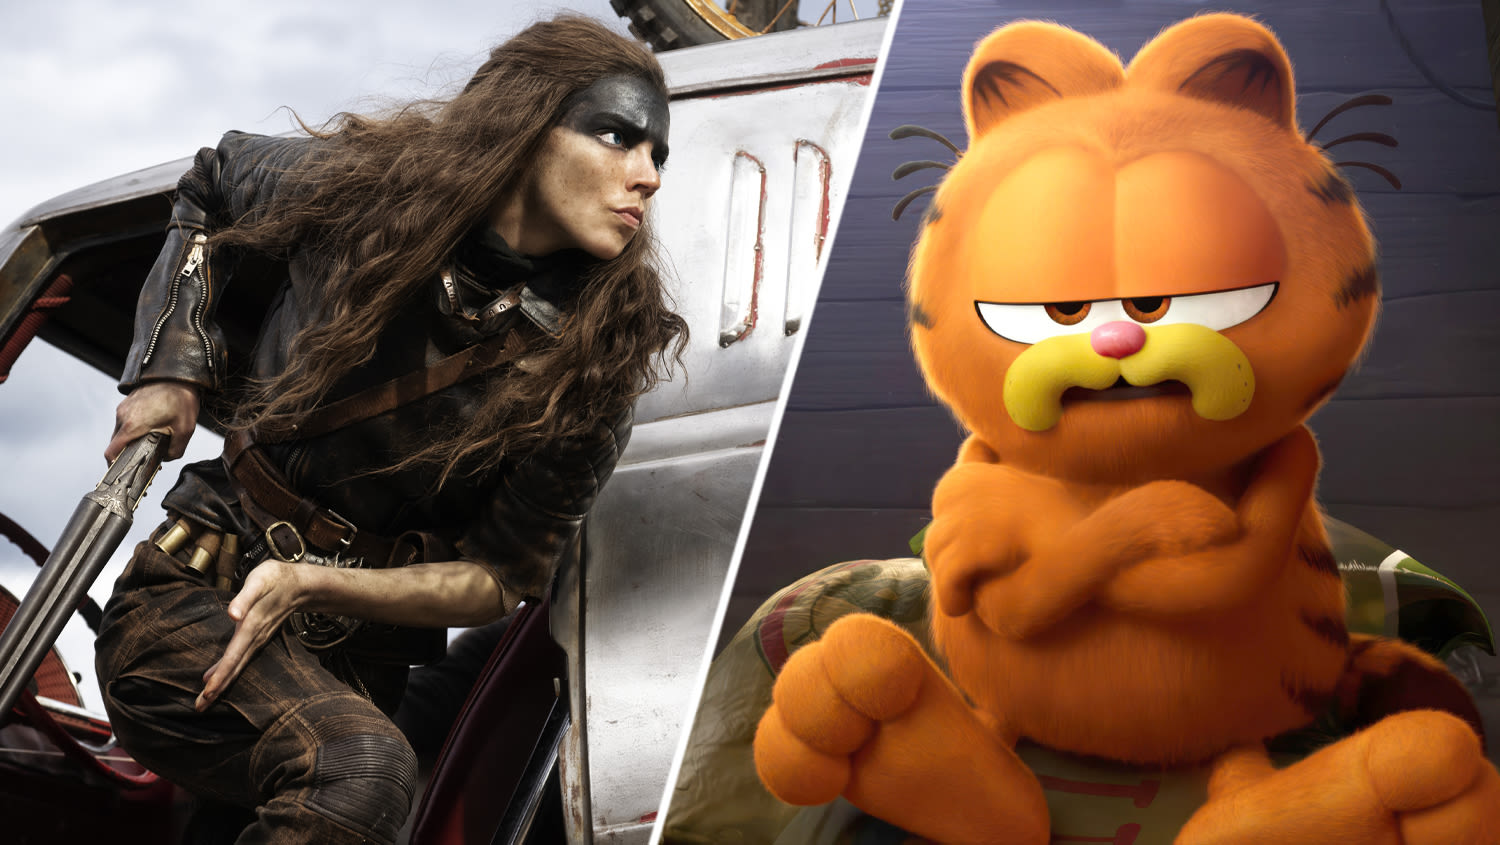 ...Lowest No. 1 Memorial Day Weekend Debut In Decades; ‘The Garfield Movie’ Clawing At $30M-$32M – Friday PM Update...